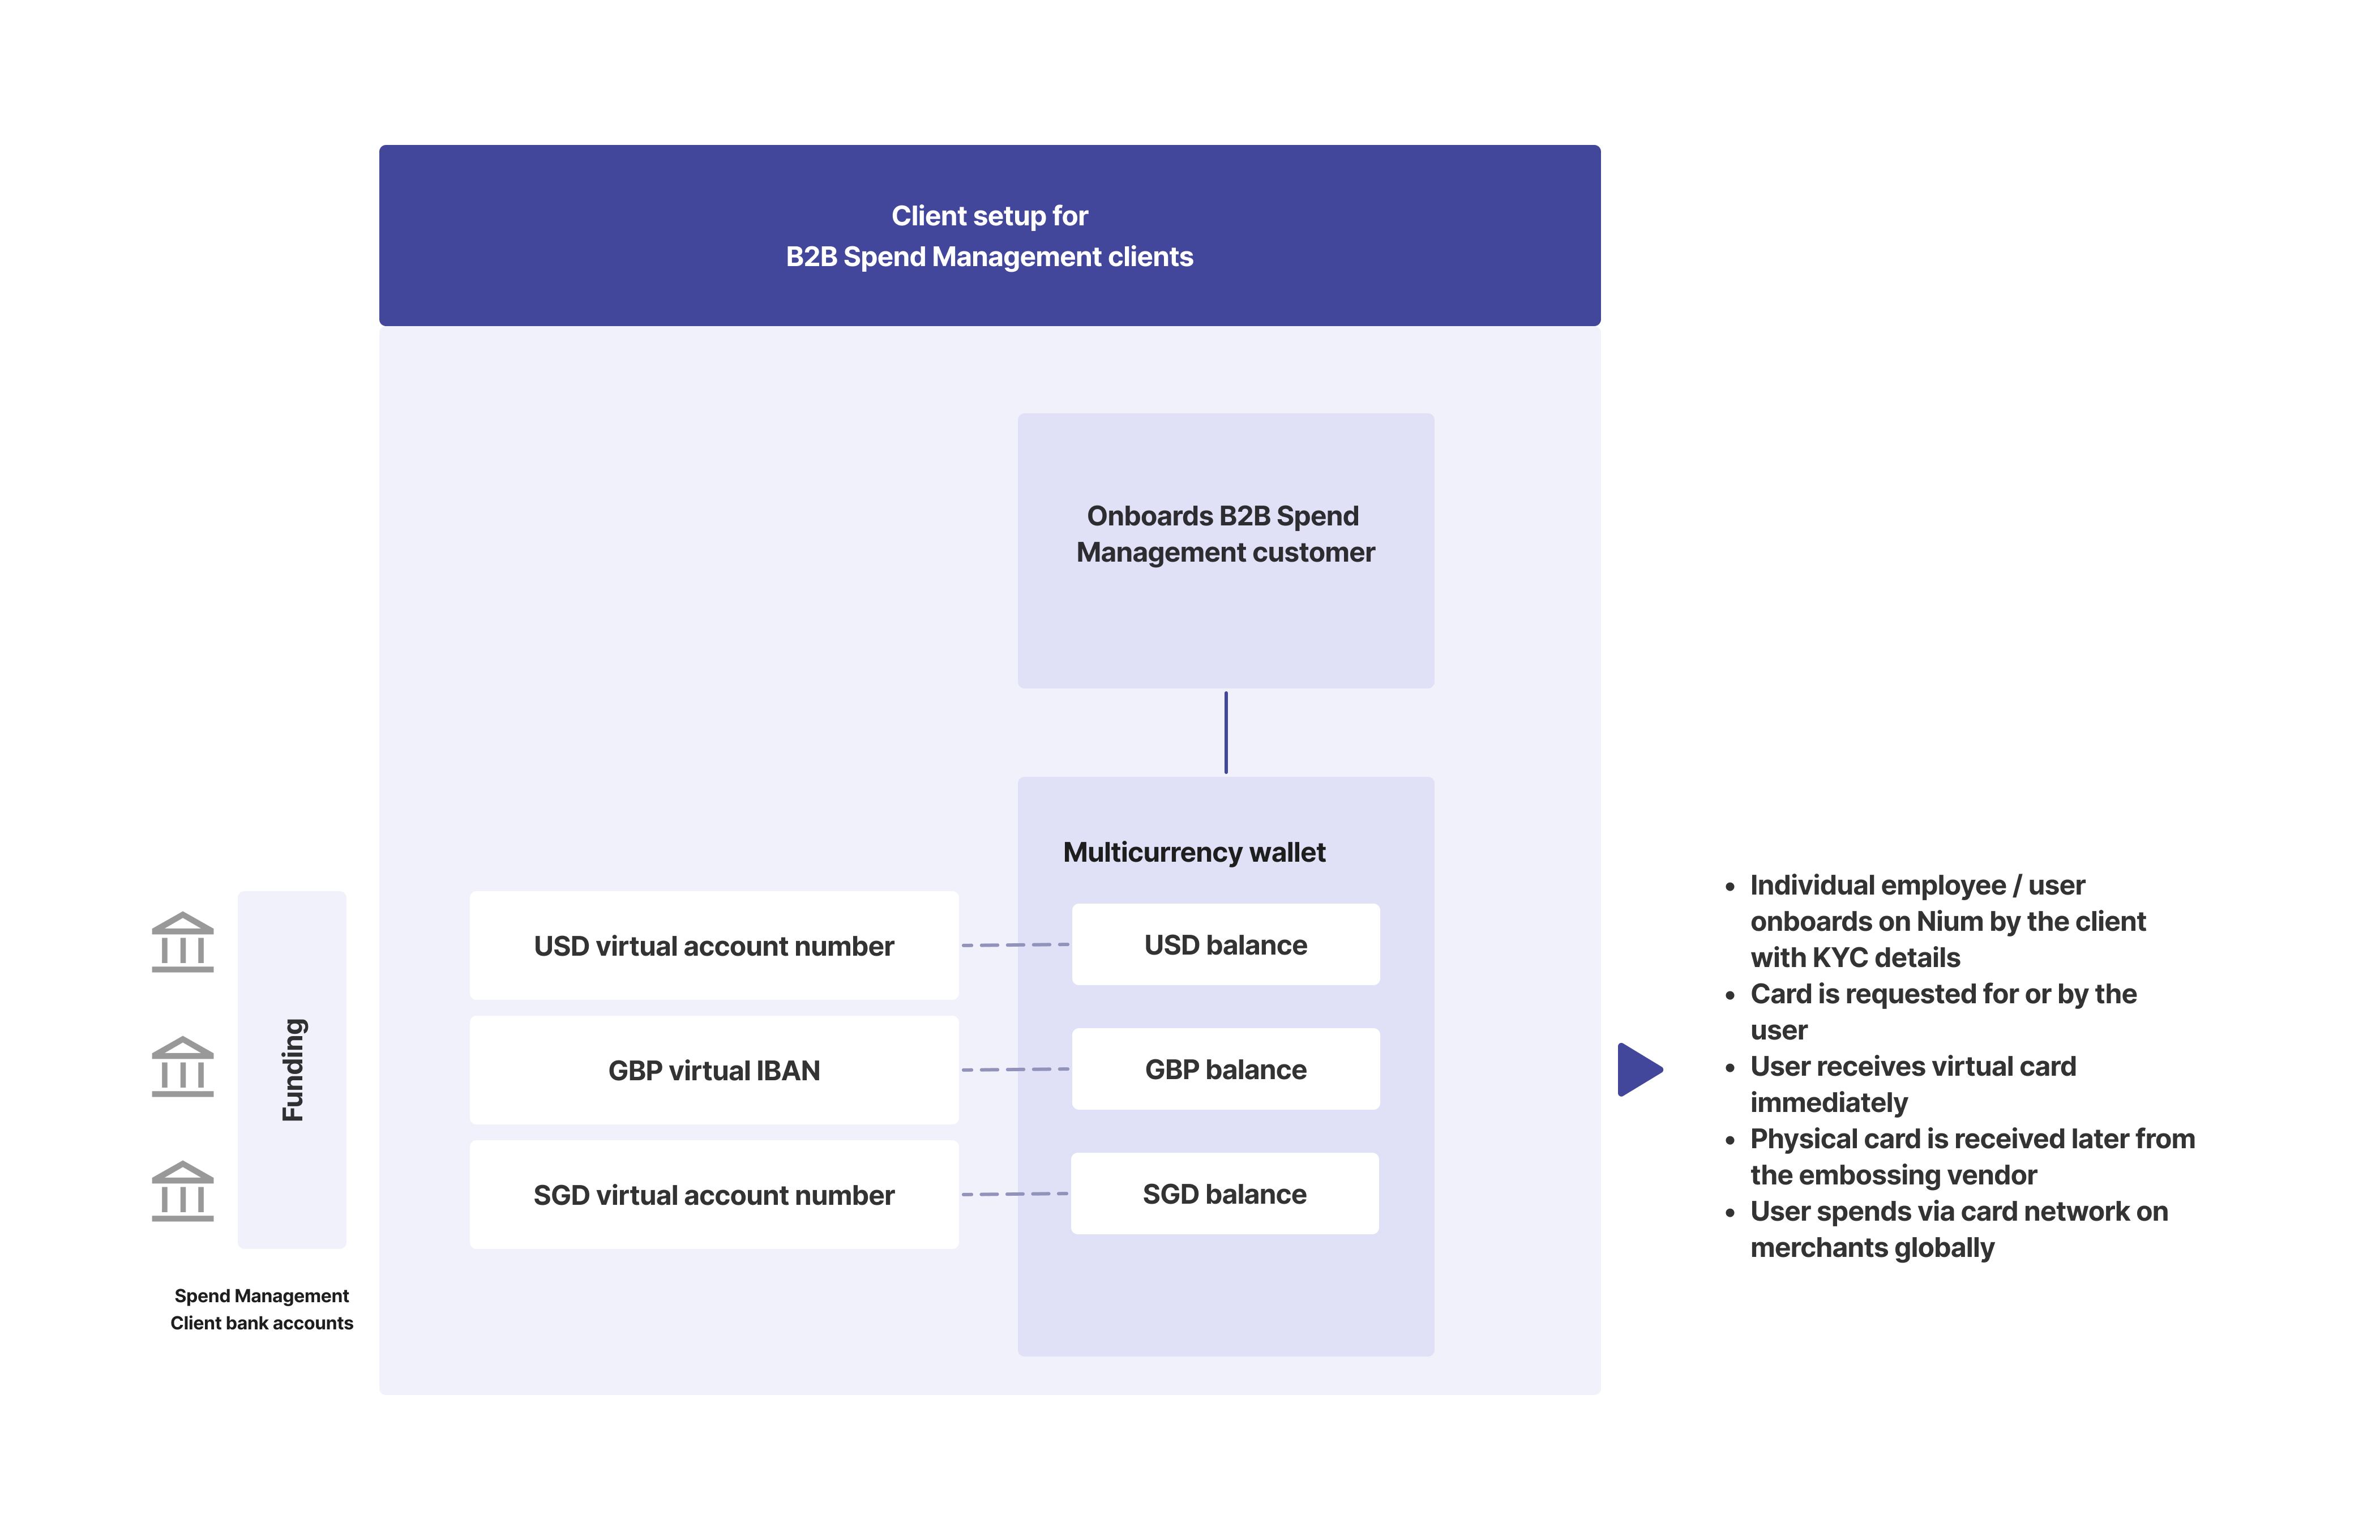 A diagram showing a financial B2B Spend Management client setup allowing the funding of wallets and card issuance through APIs.